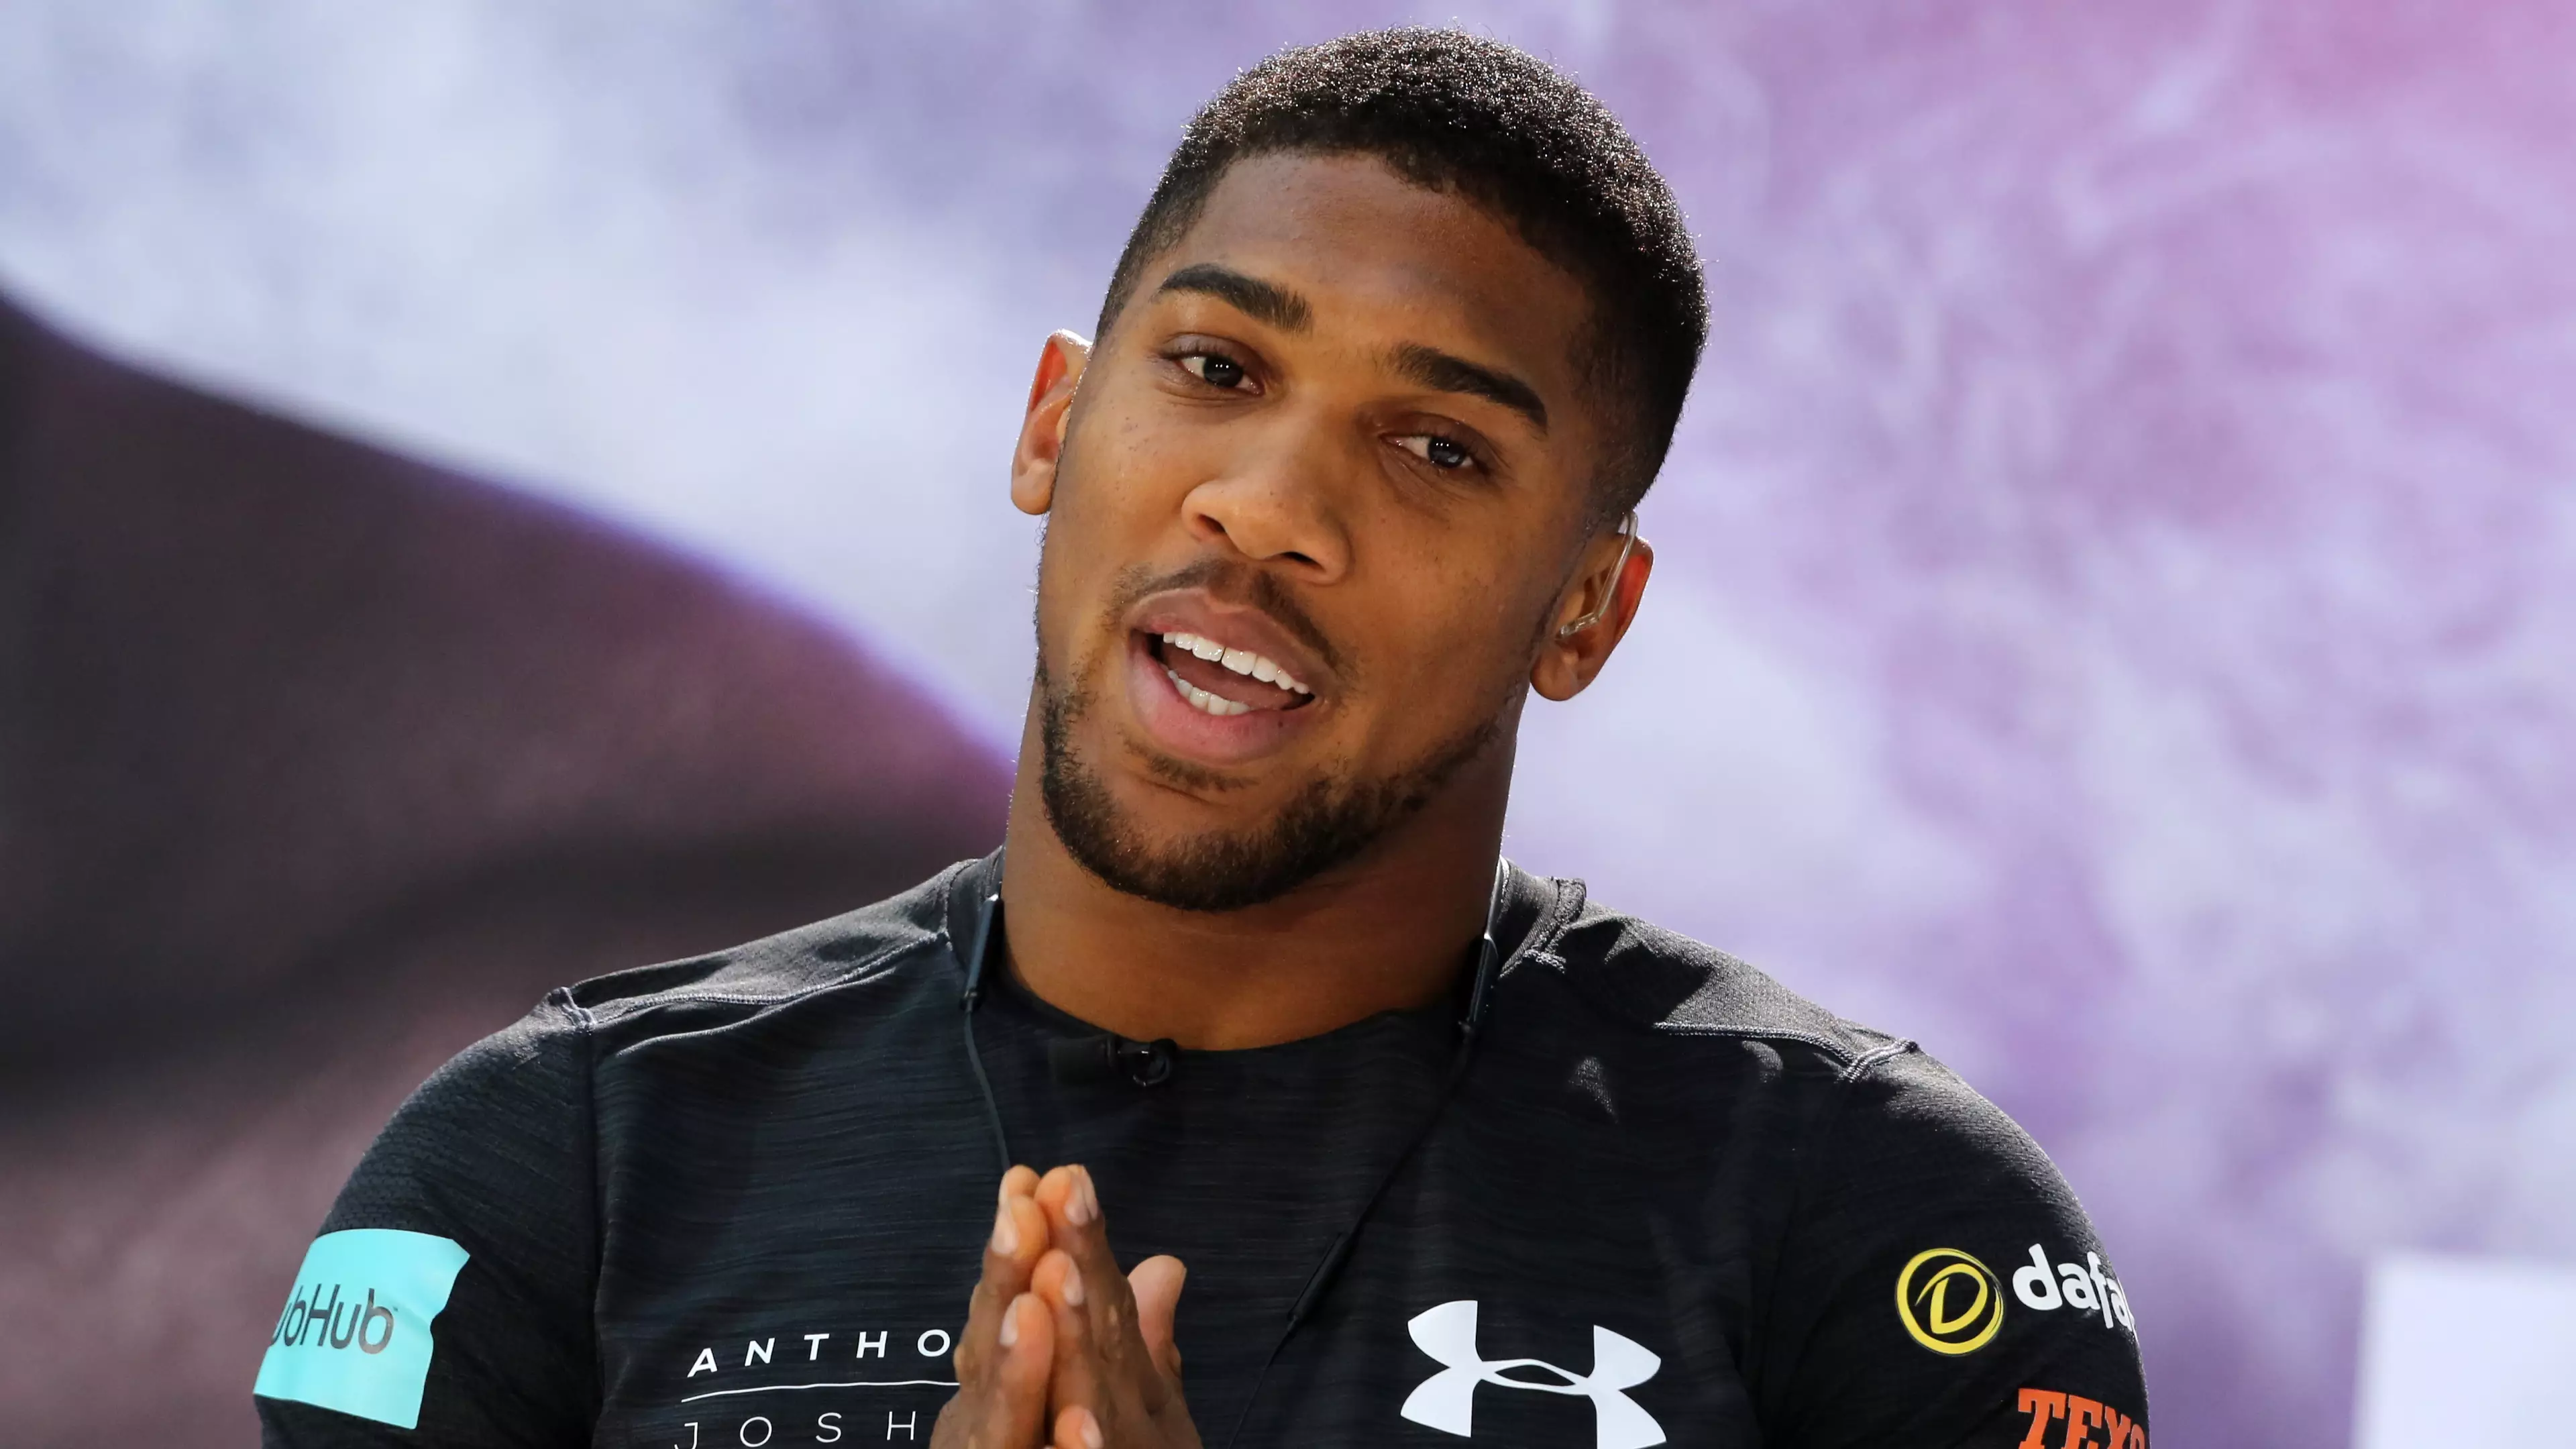 Anthony Joshua Looks In The Shape Of His Life Ahead Of Klitschko In April